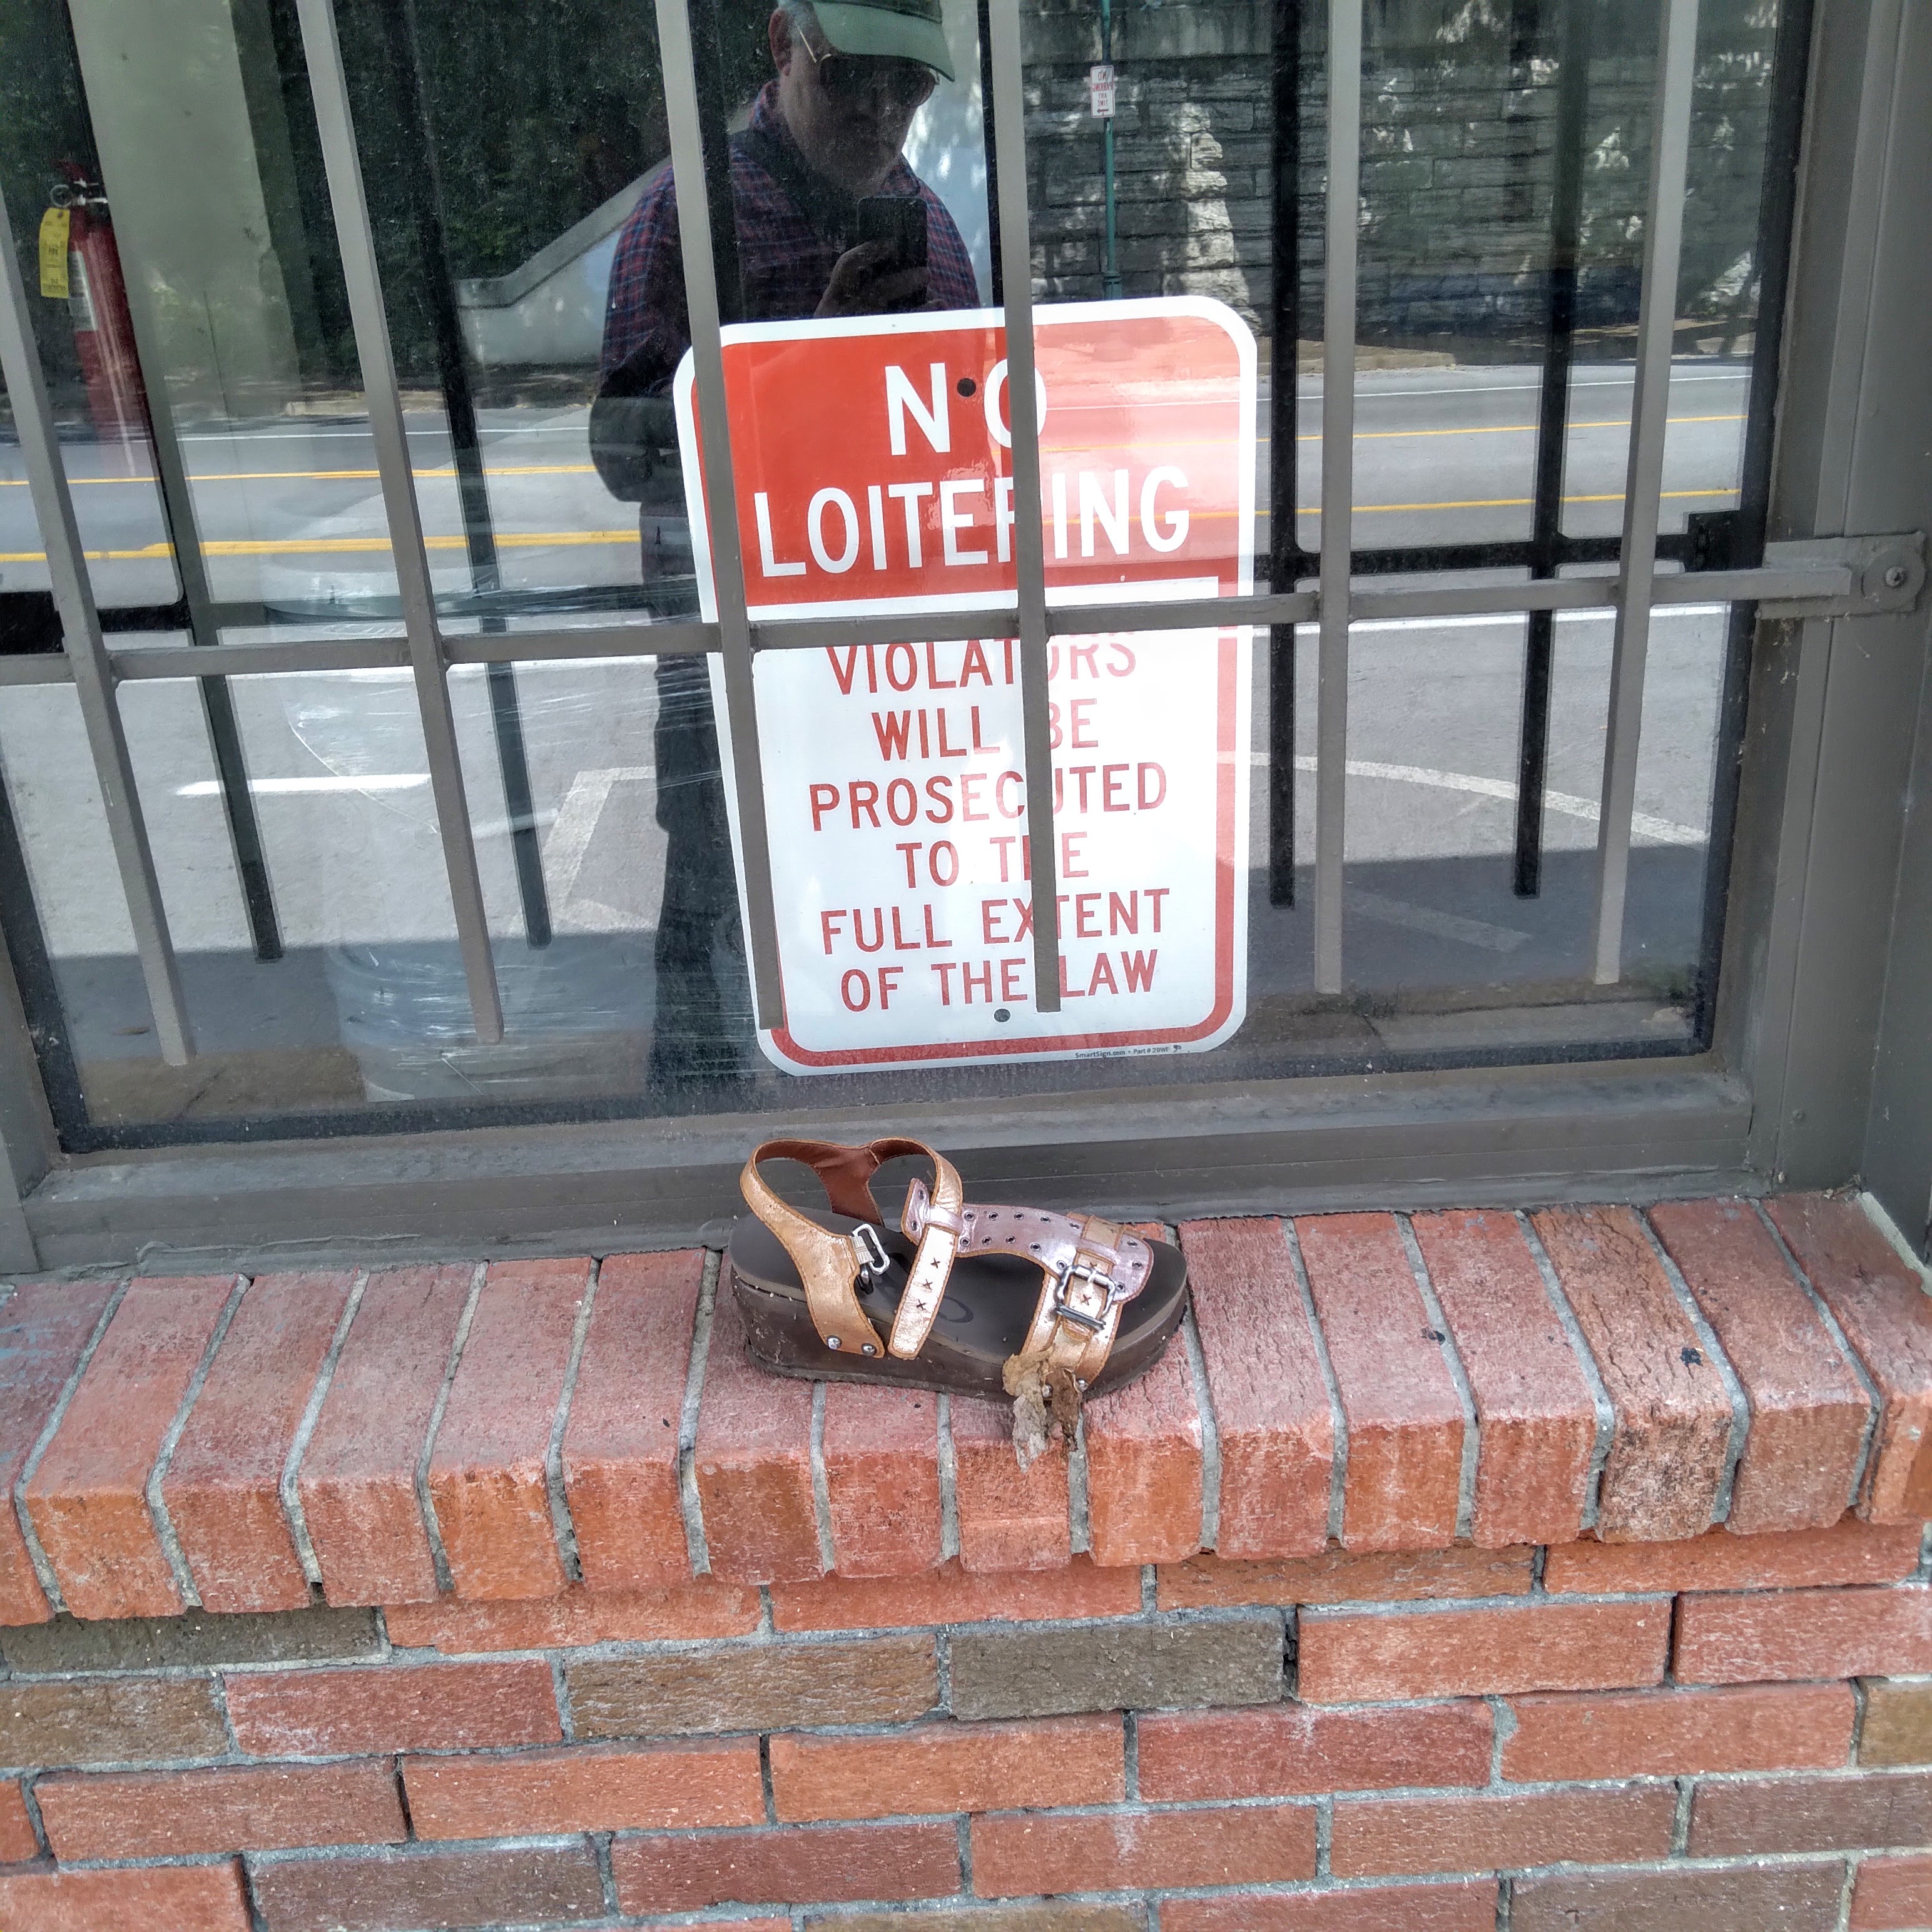 I saw a lost shoe on Martin Luther King, Jr Boulevard, in Chattanooga.